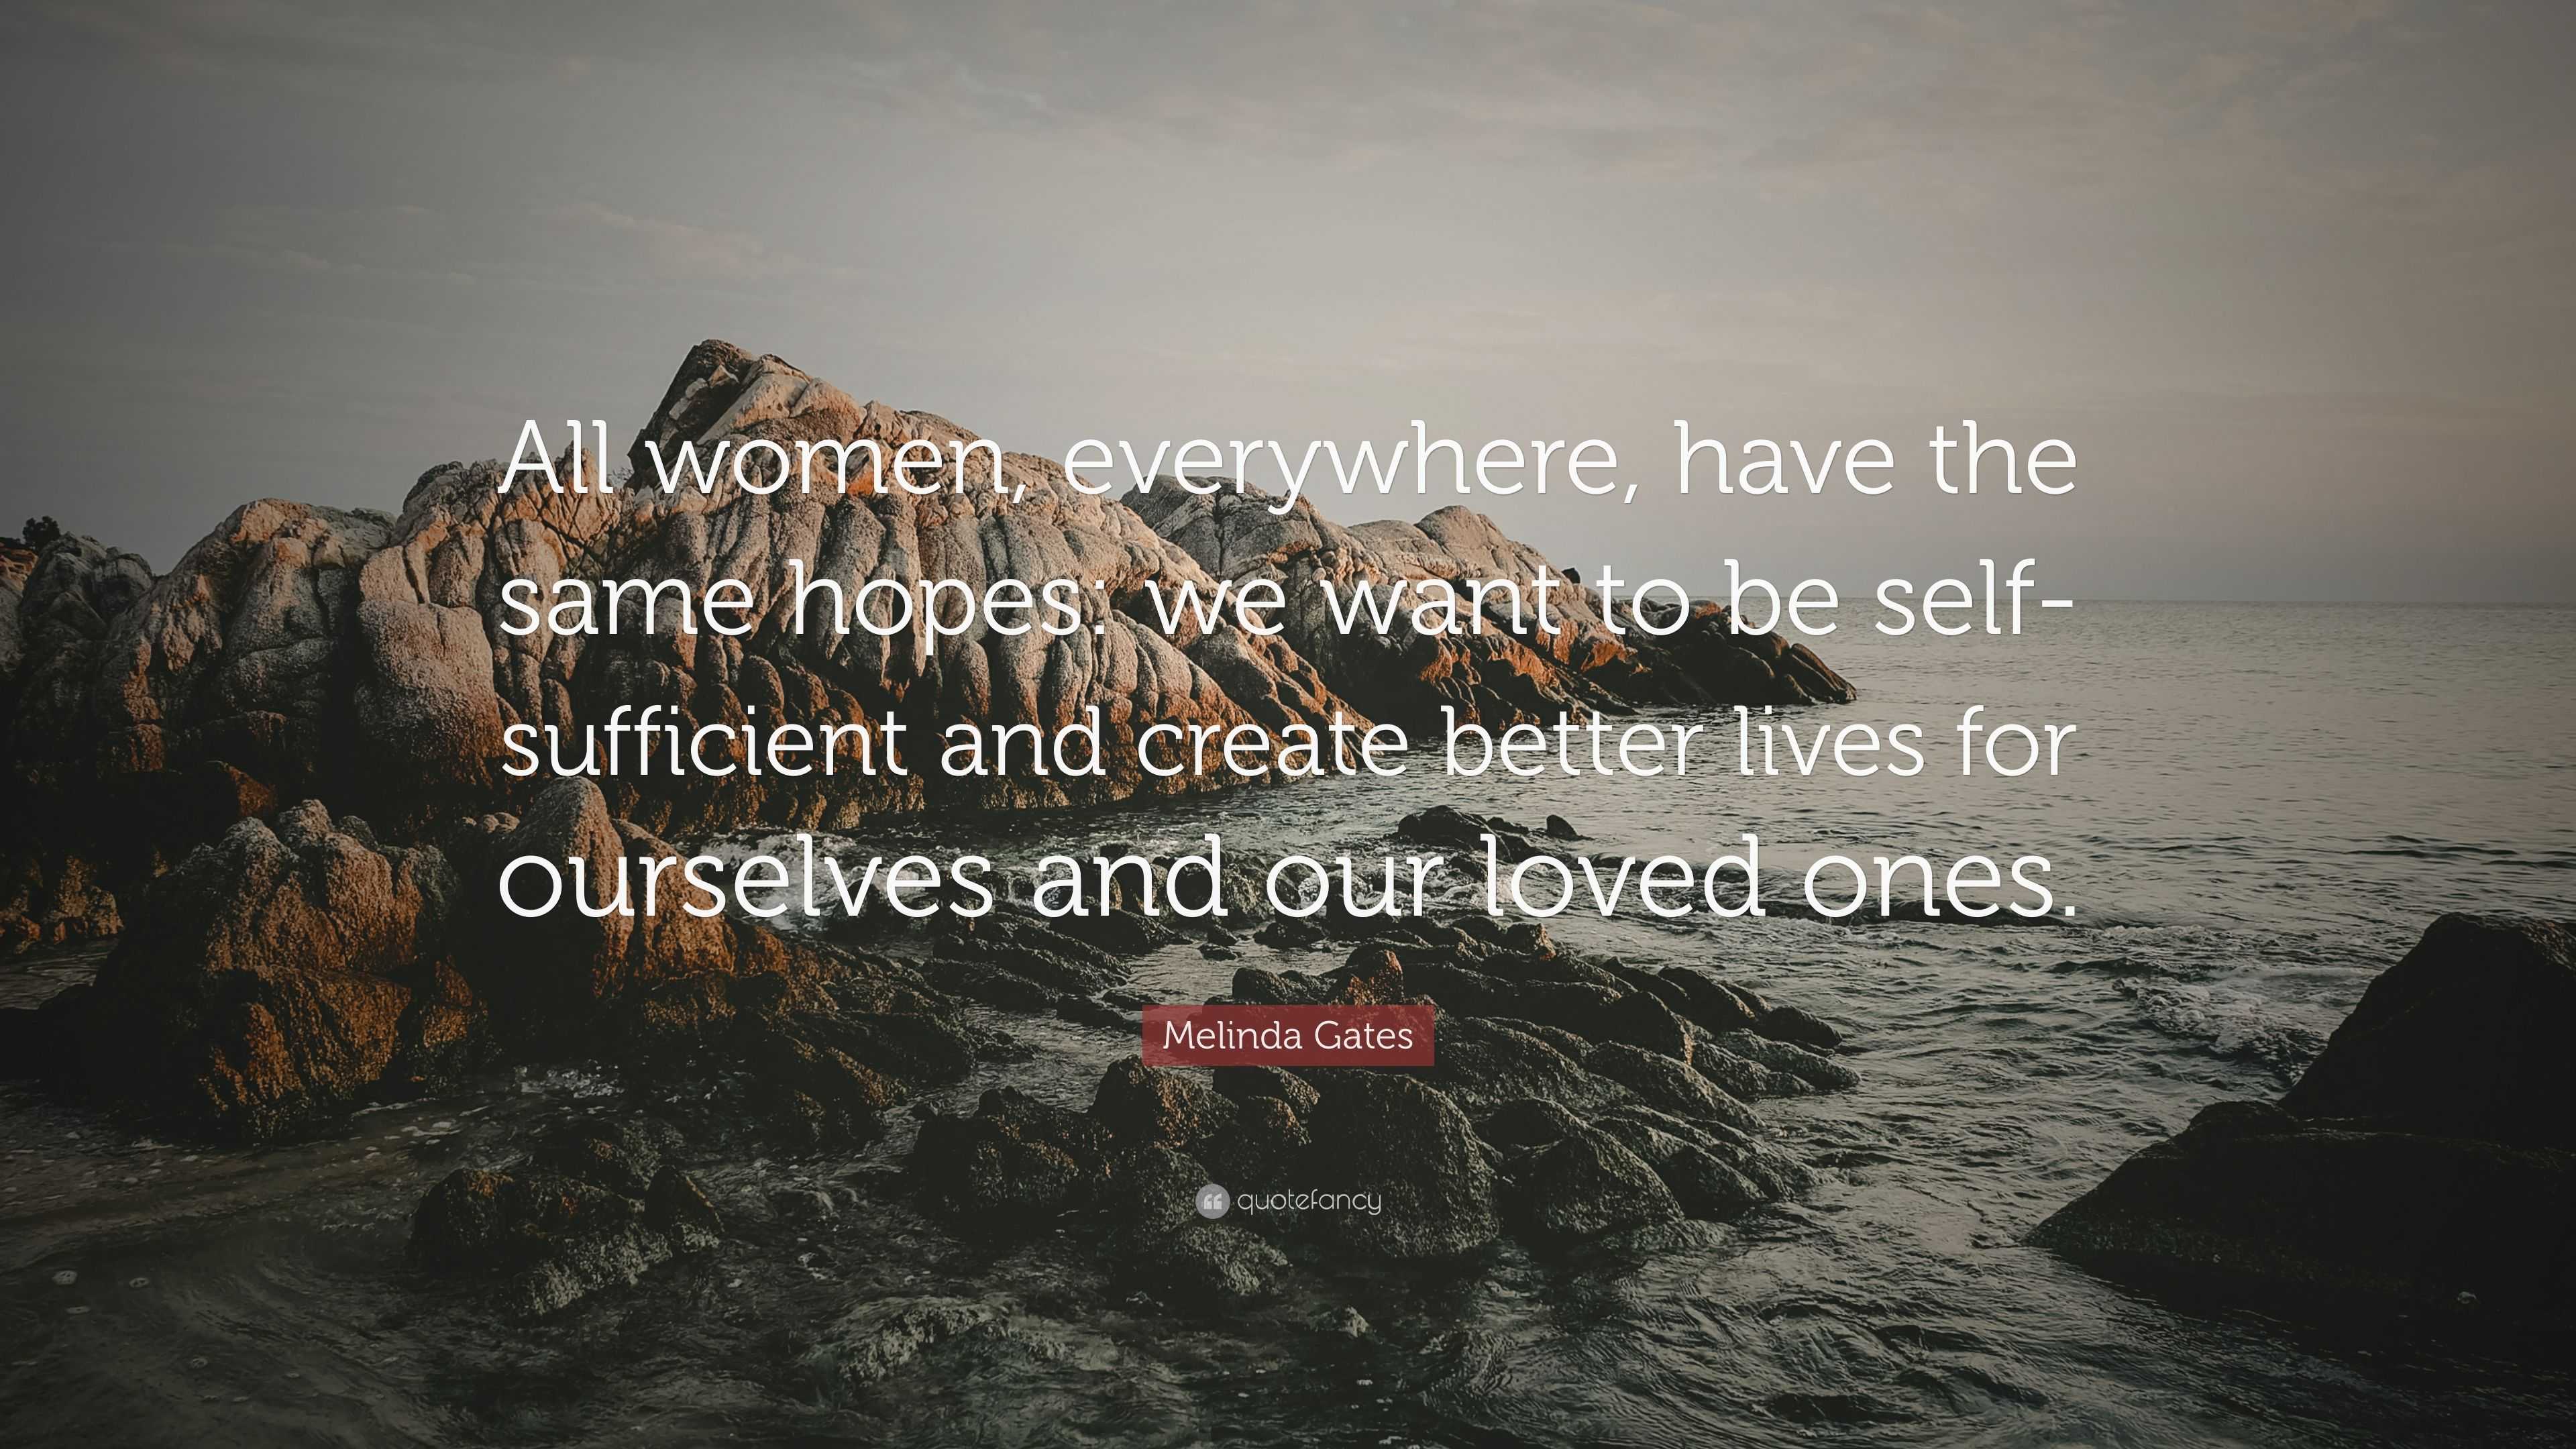 Melinda Gates Quote: “All women, everywhere, have the same hopes: we ...